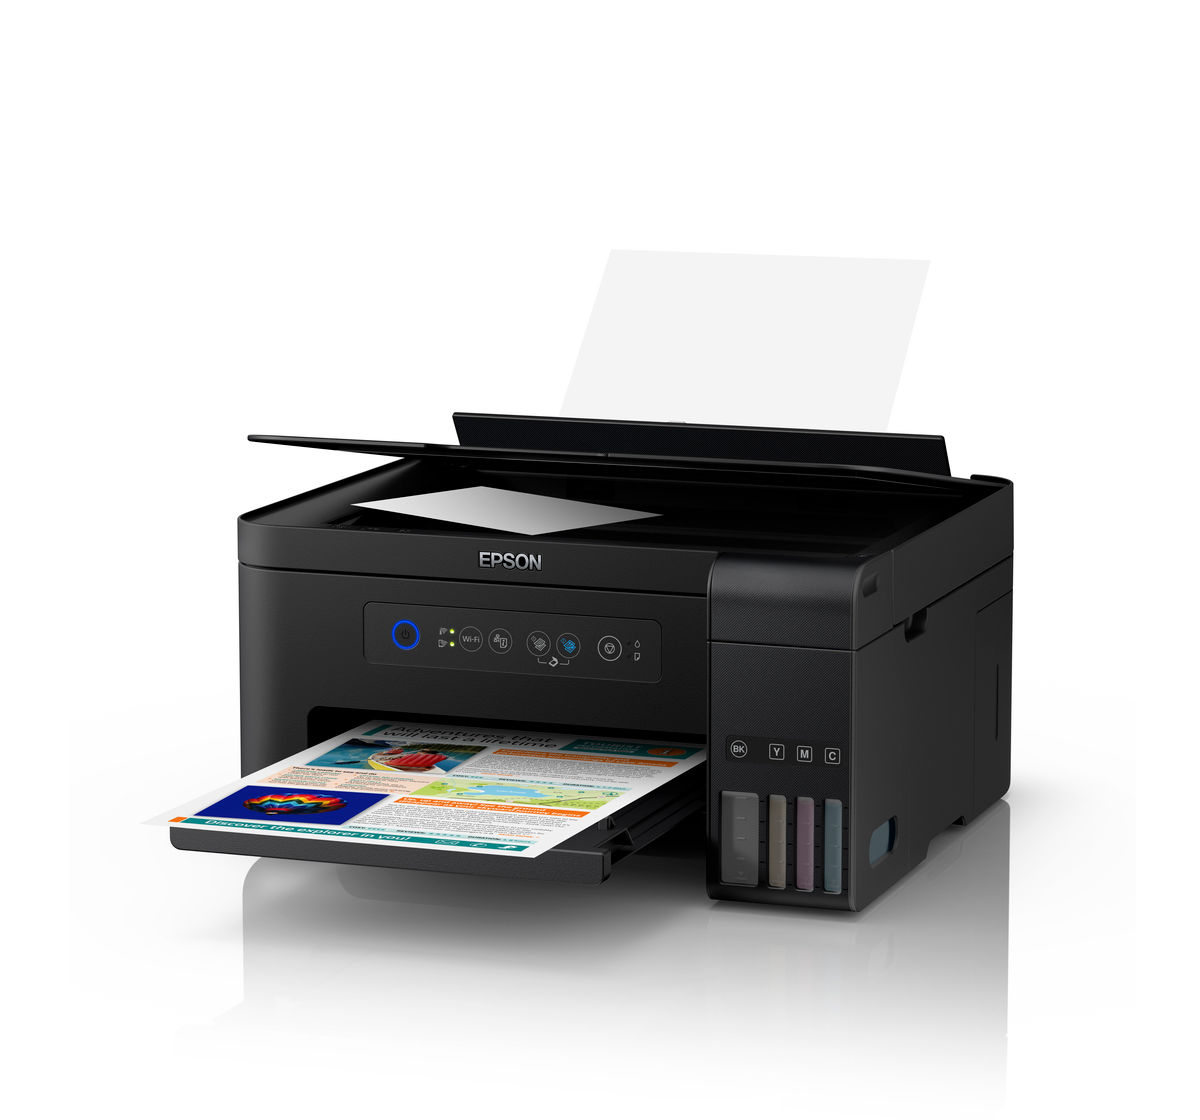 Epson L4150 All-in-One Wireless Ink Tank Colour Printer (Black)